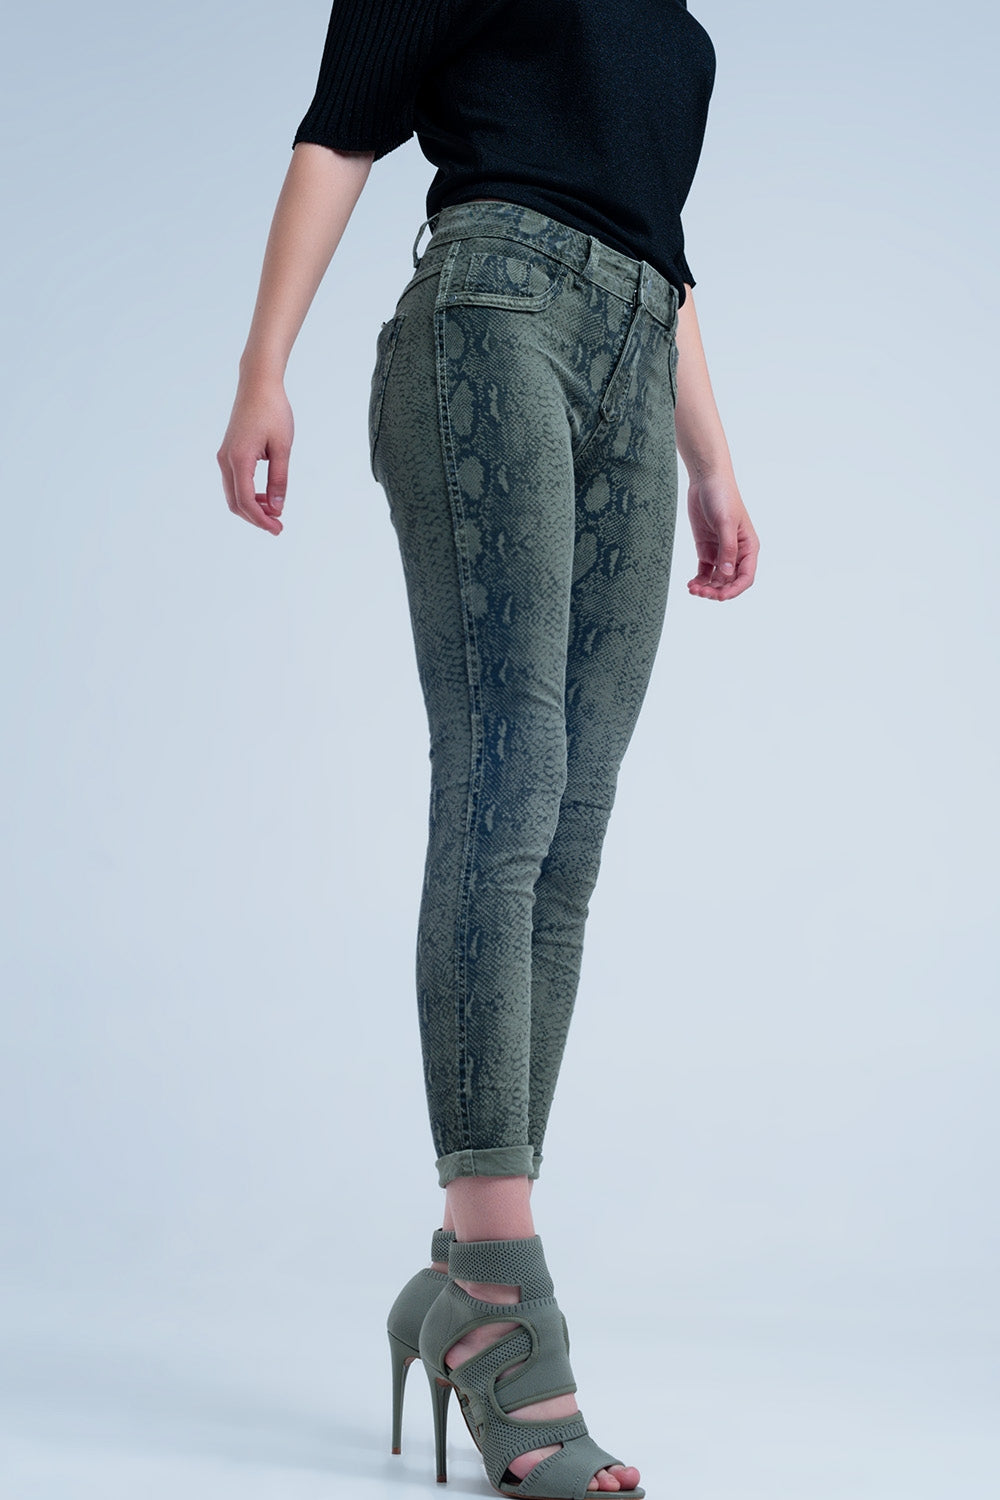 Q2 Green skinny reversible jeans with snake print